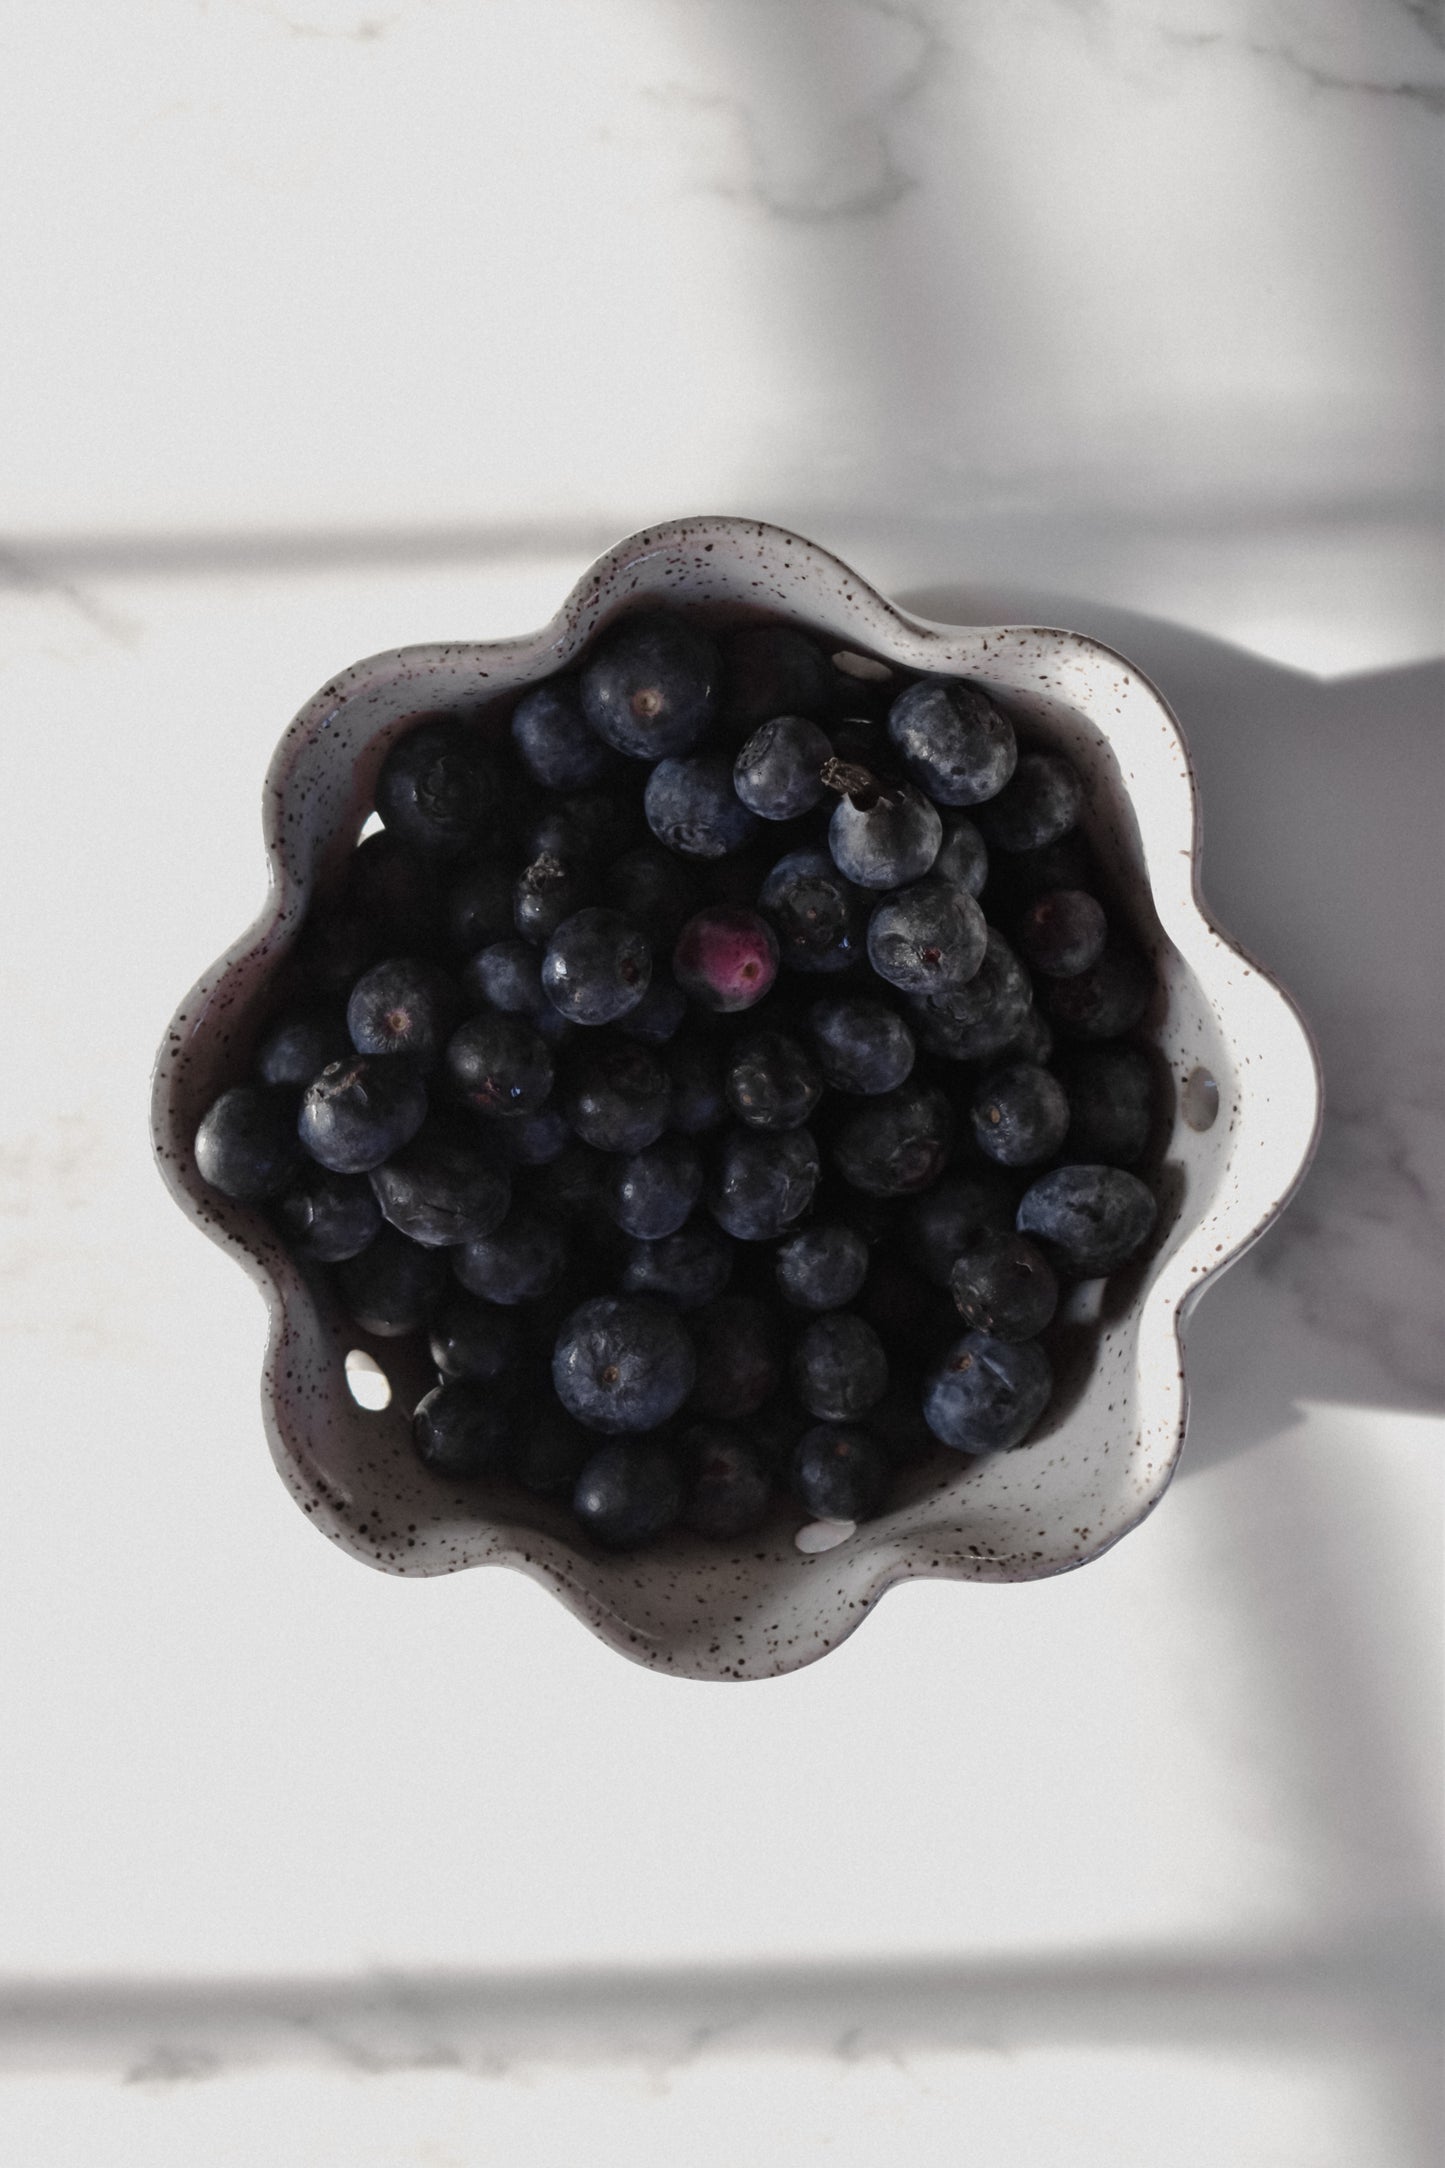 Dover Berry Bowls